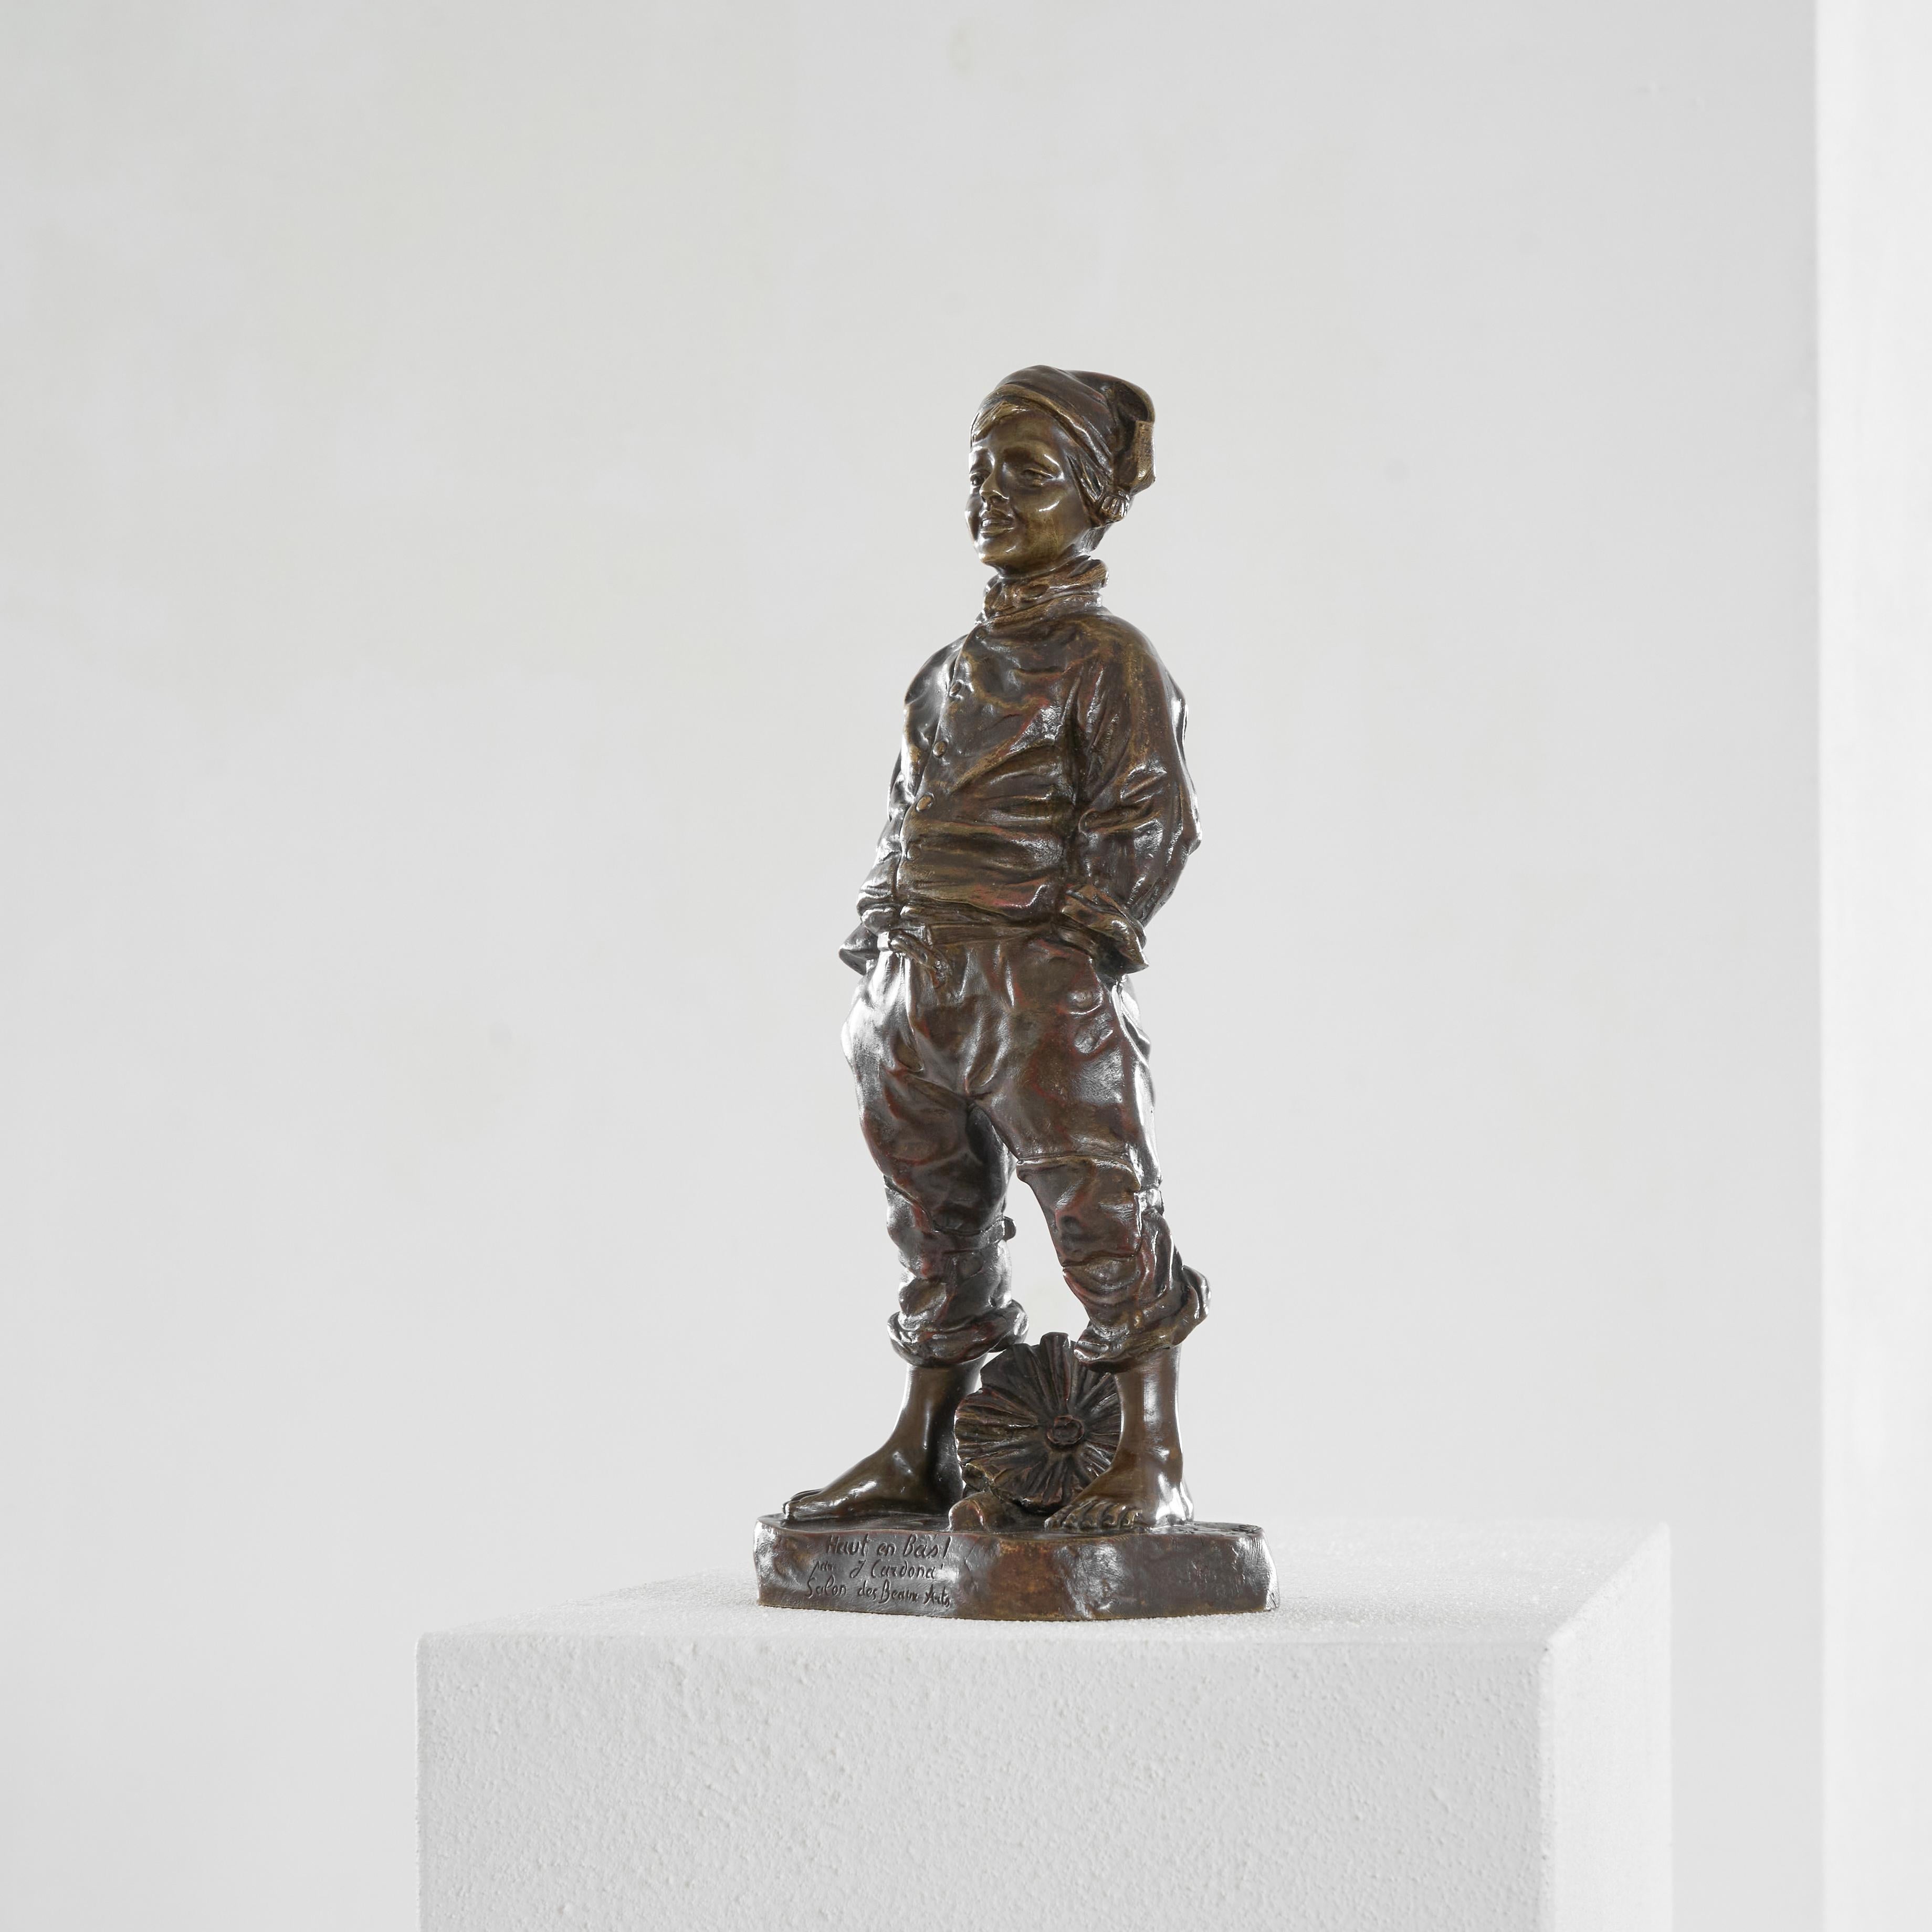 Josép Cardona i Furró bronze sculpture of a boy. Spain, late 19th Century / early 20th century.

This is a bronze sculpture of a boy, made by famous Spanish sculptor Josép Cardona i Furró (1878-1922). Cardona was a good friend of Pablo Picasso and